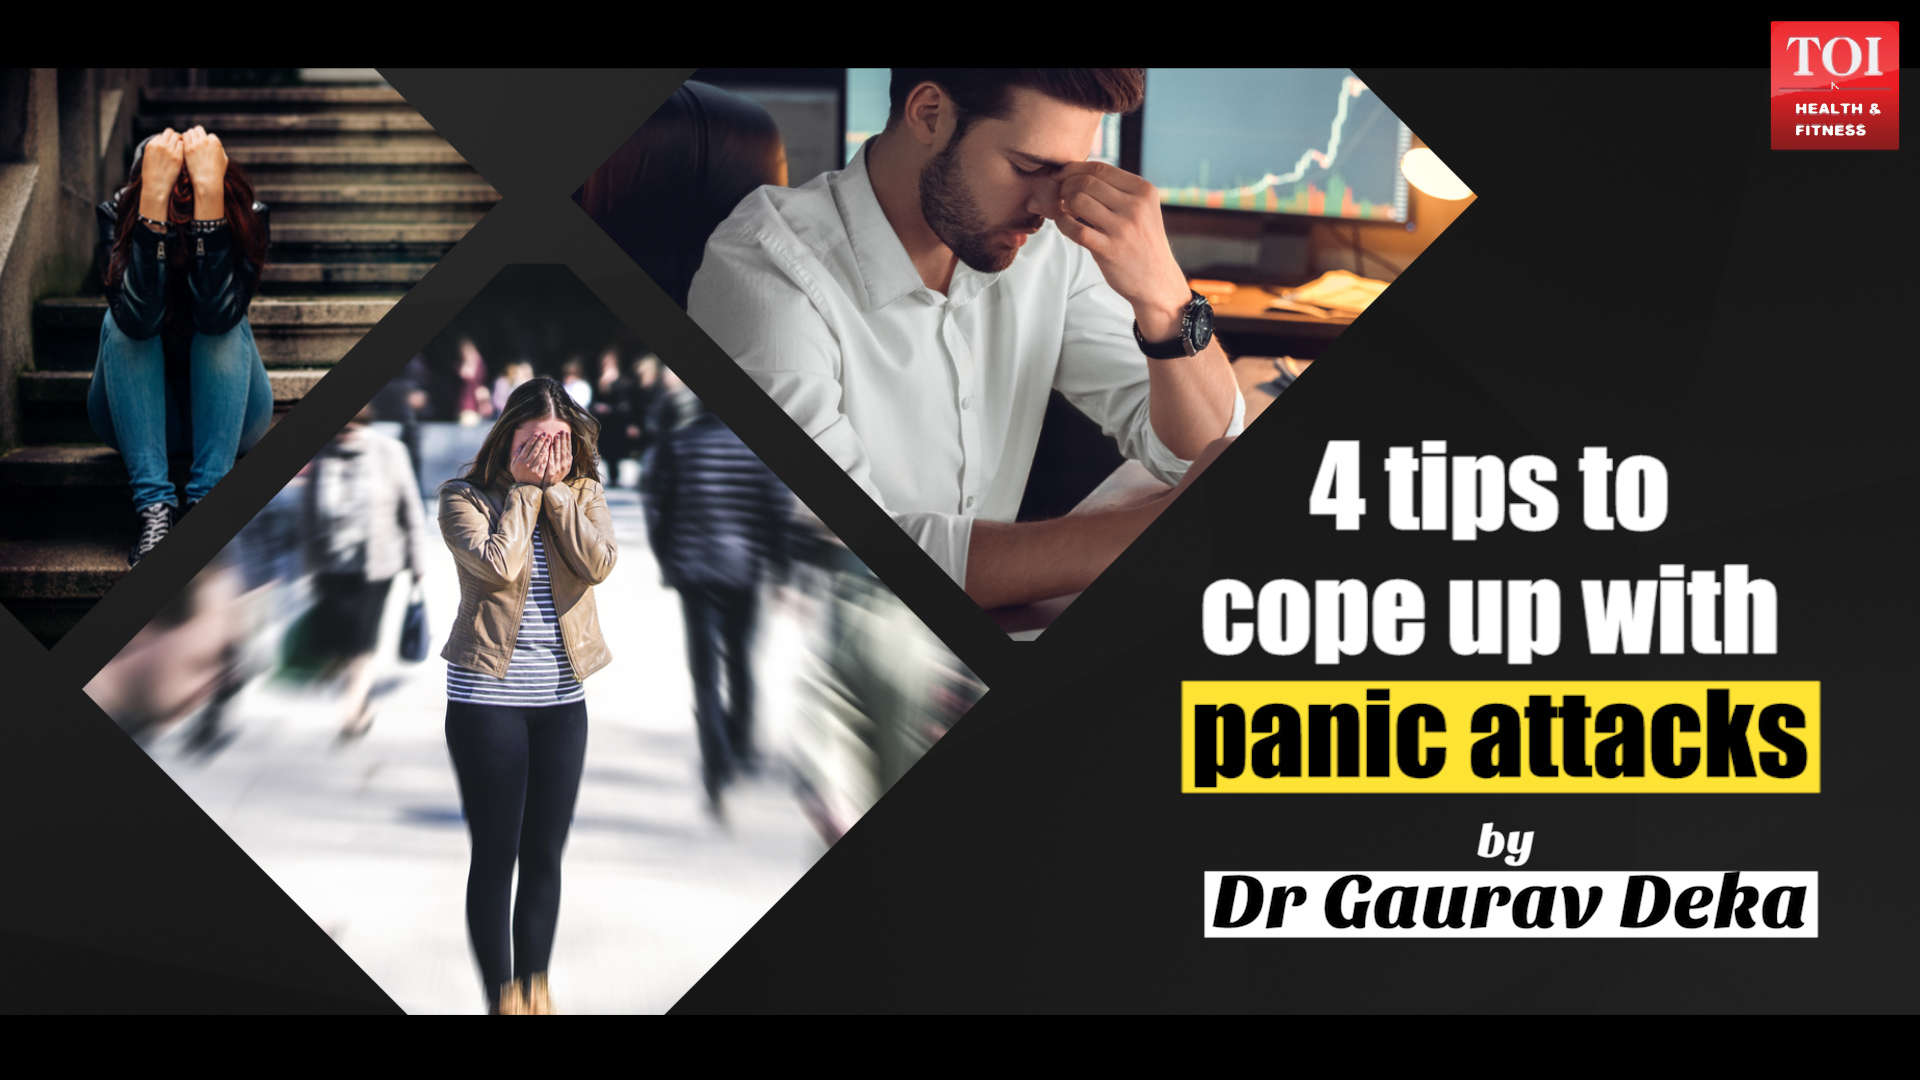 Video 4 Tips To Stop A Panic Attack Times Of India